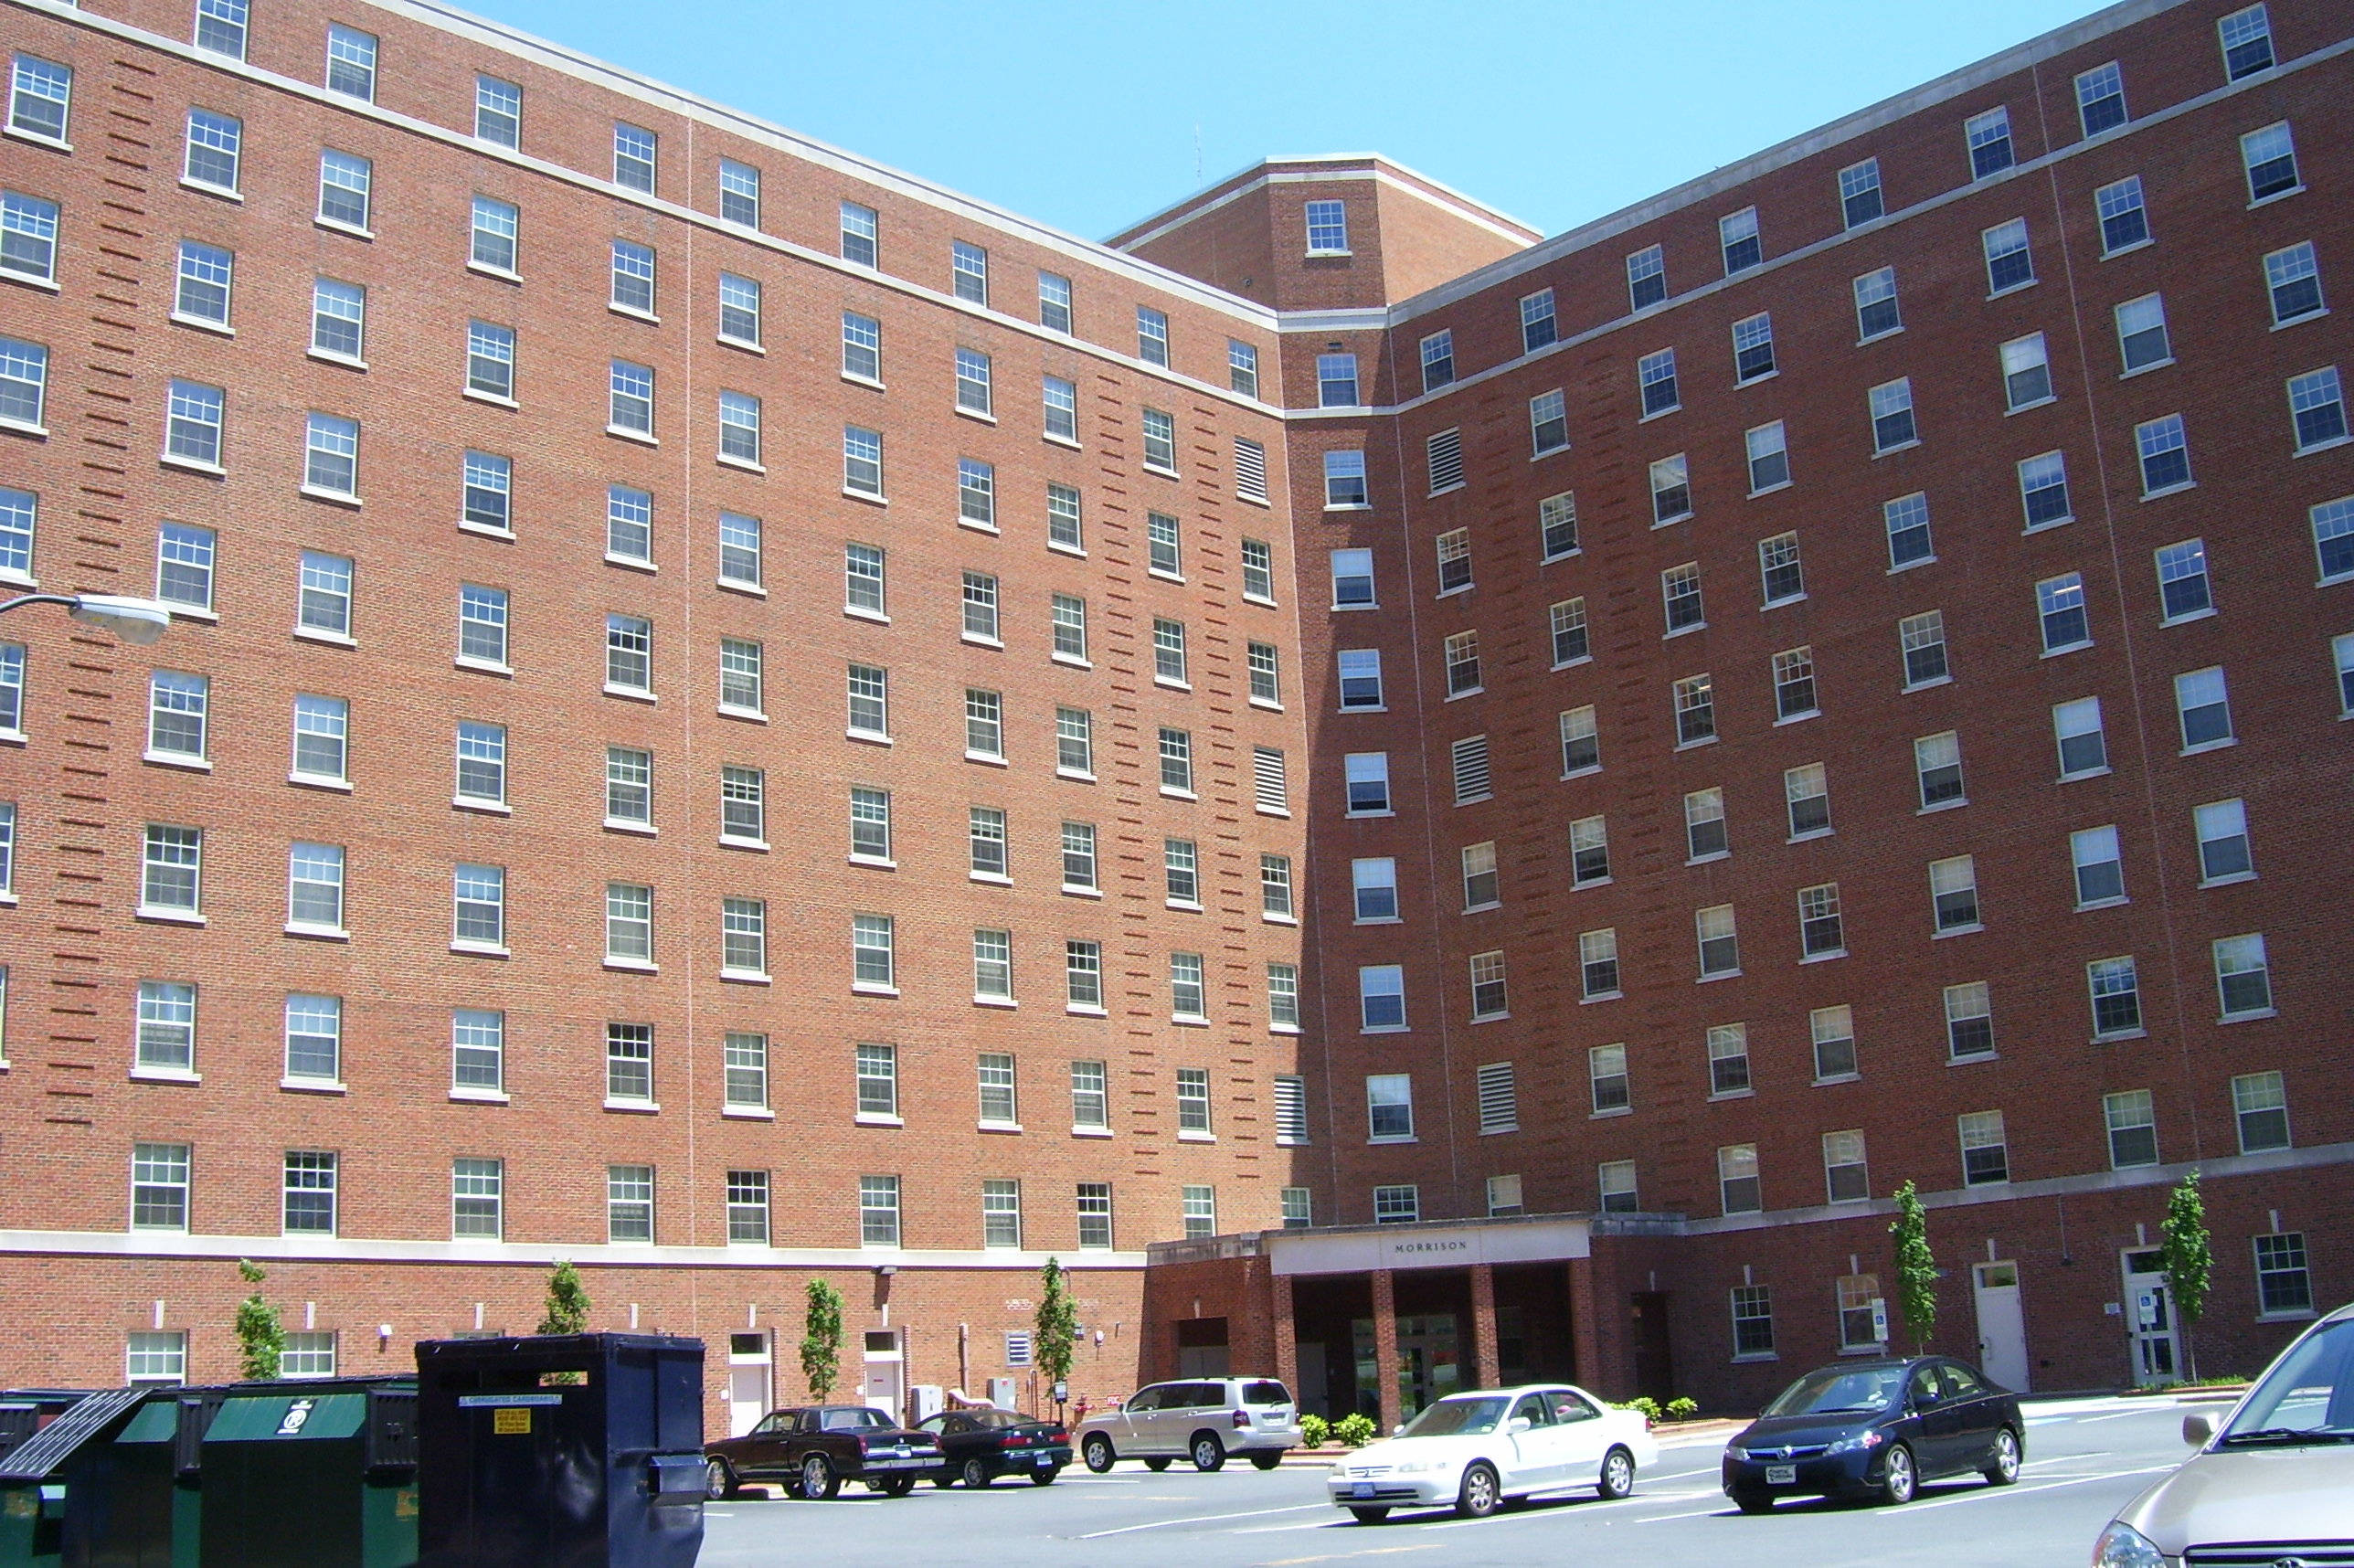 Contemporary Photo of Morrison Residence Hall